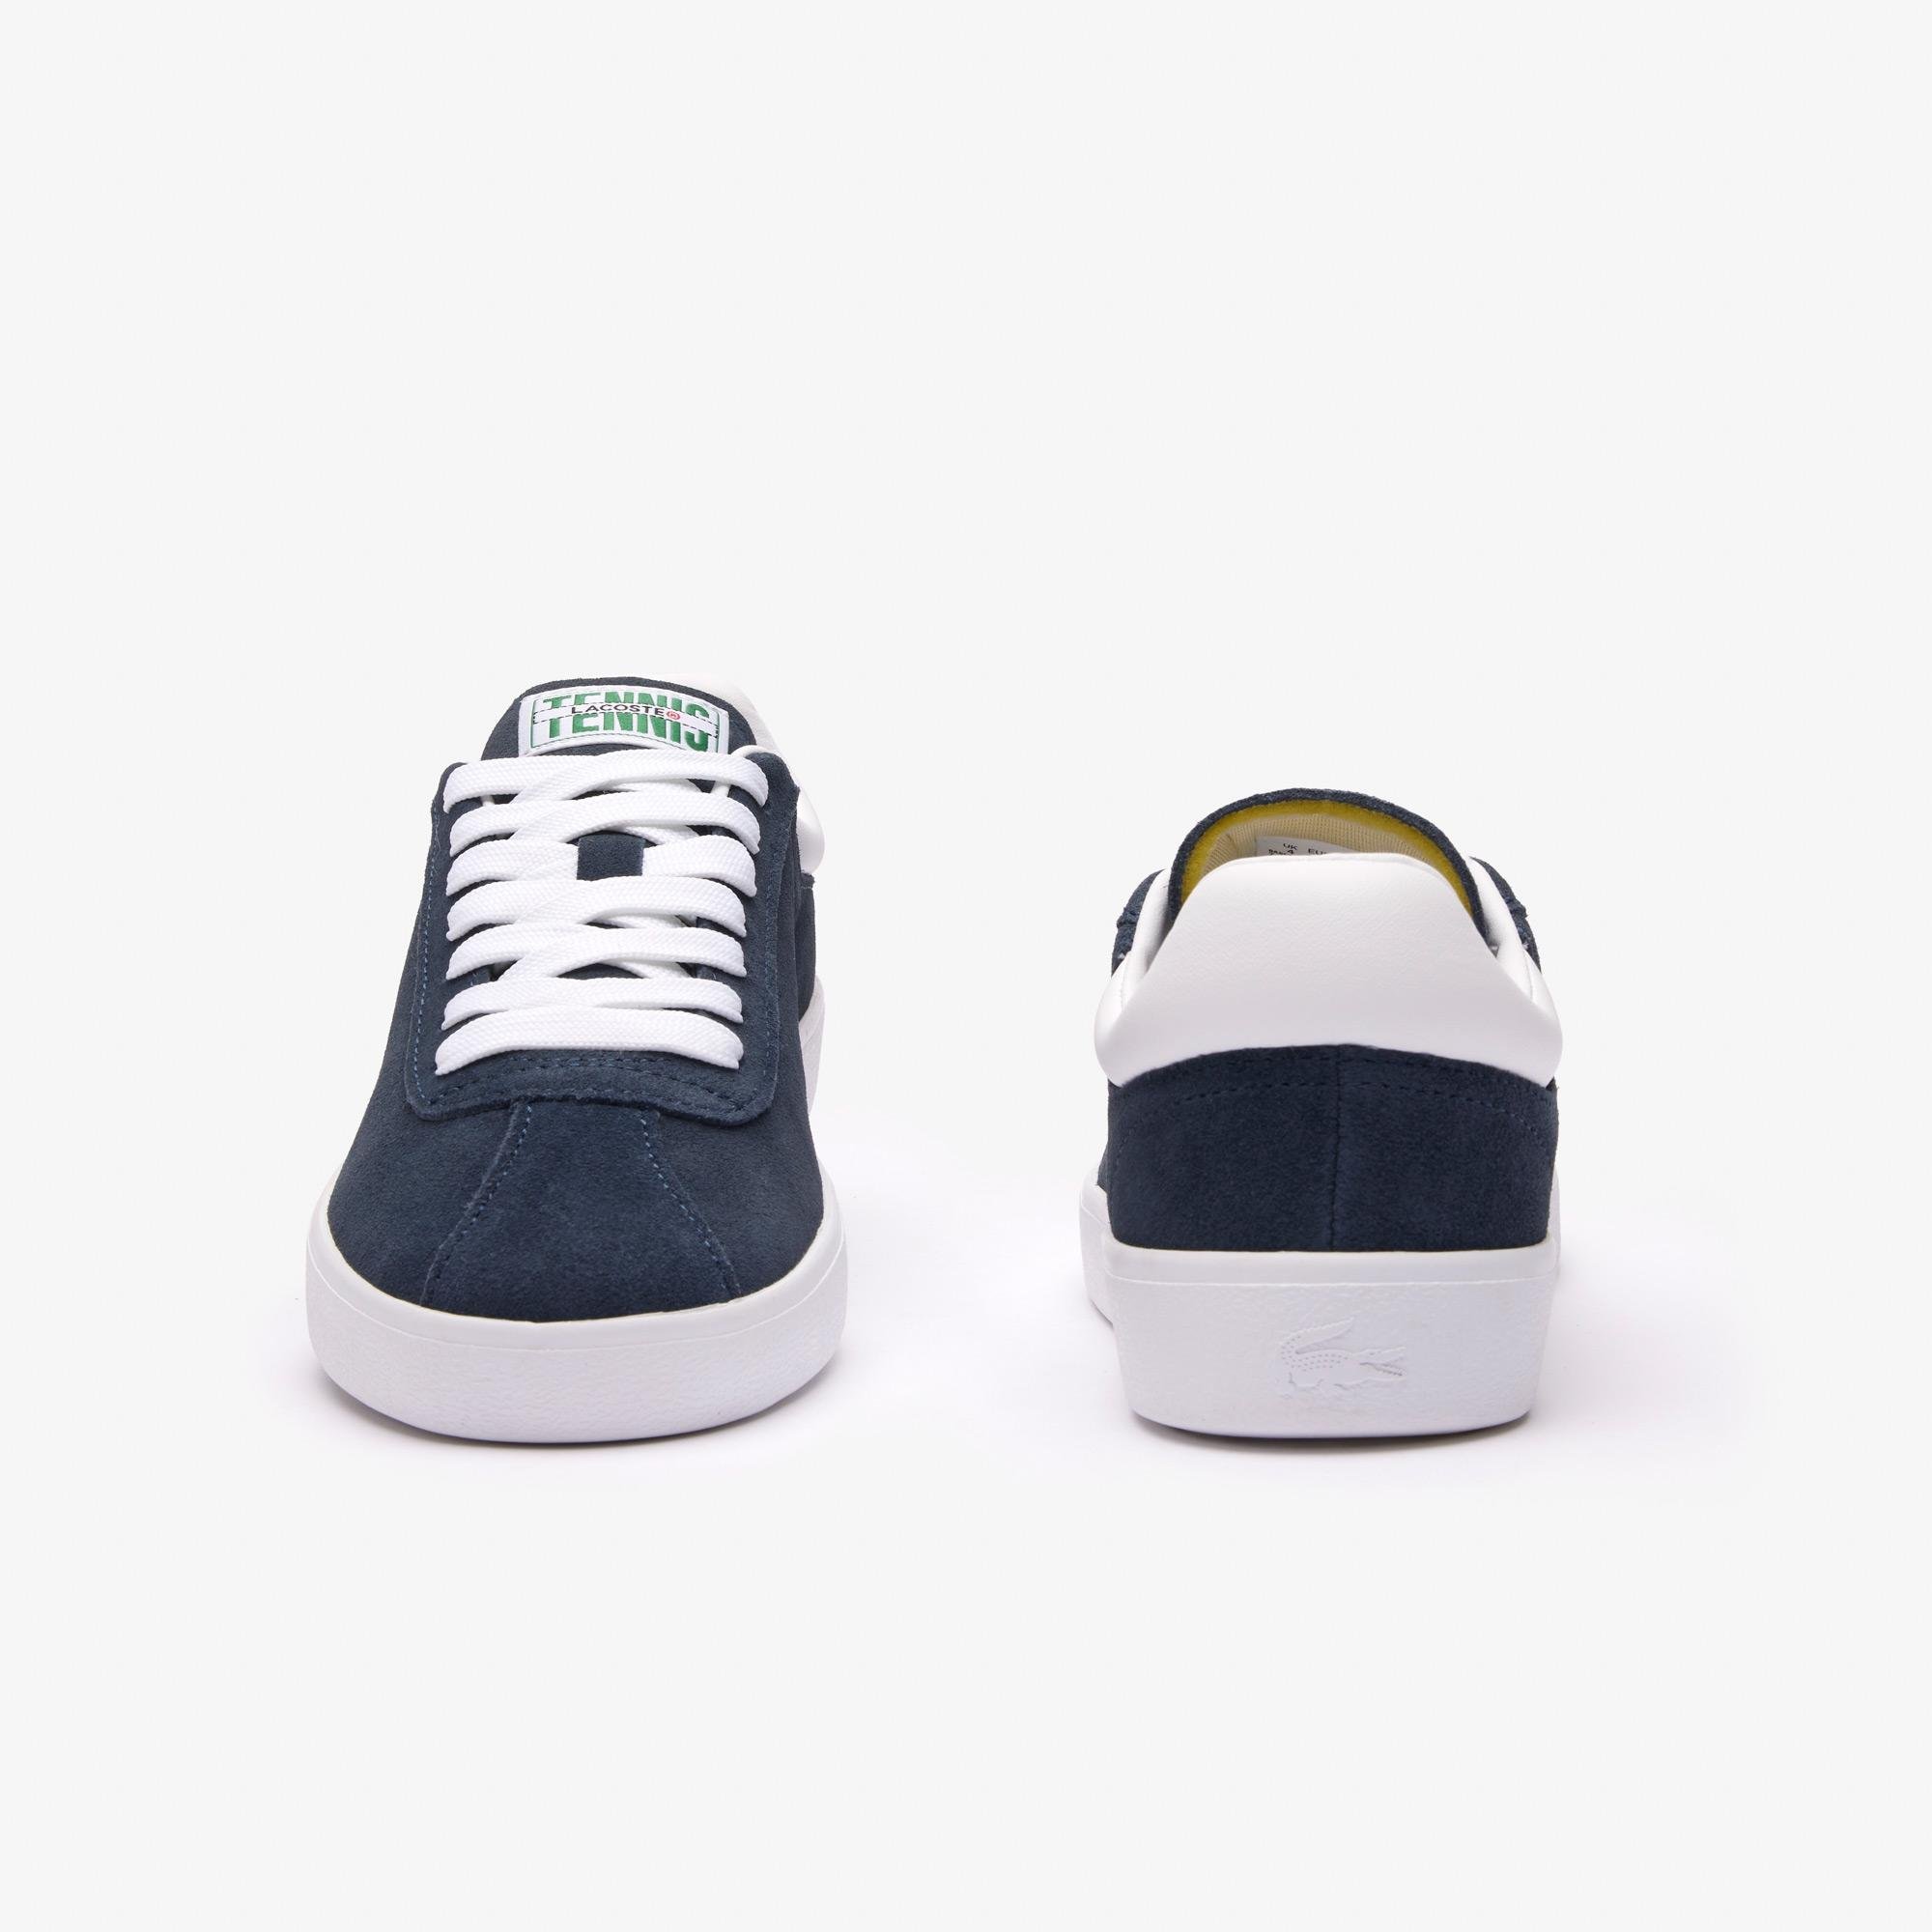 Lacoste Women's Baseshot Suede Trainers